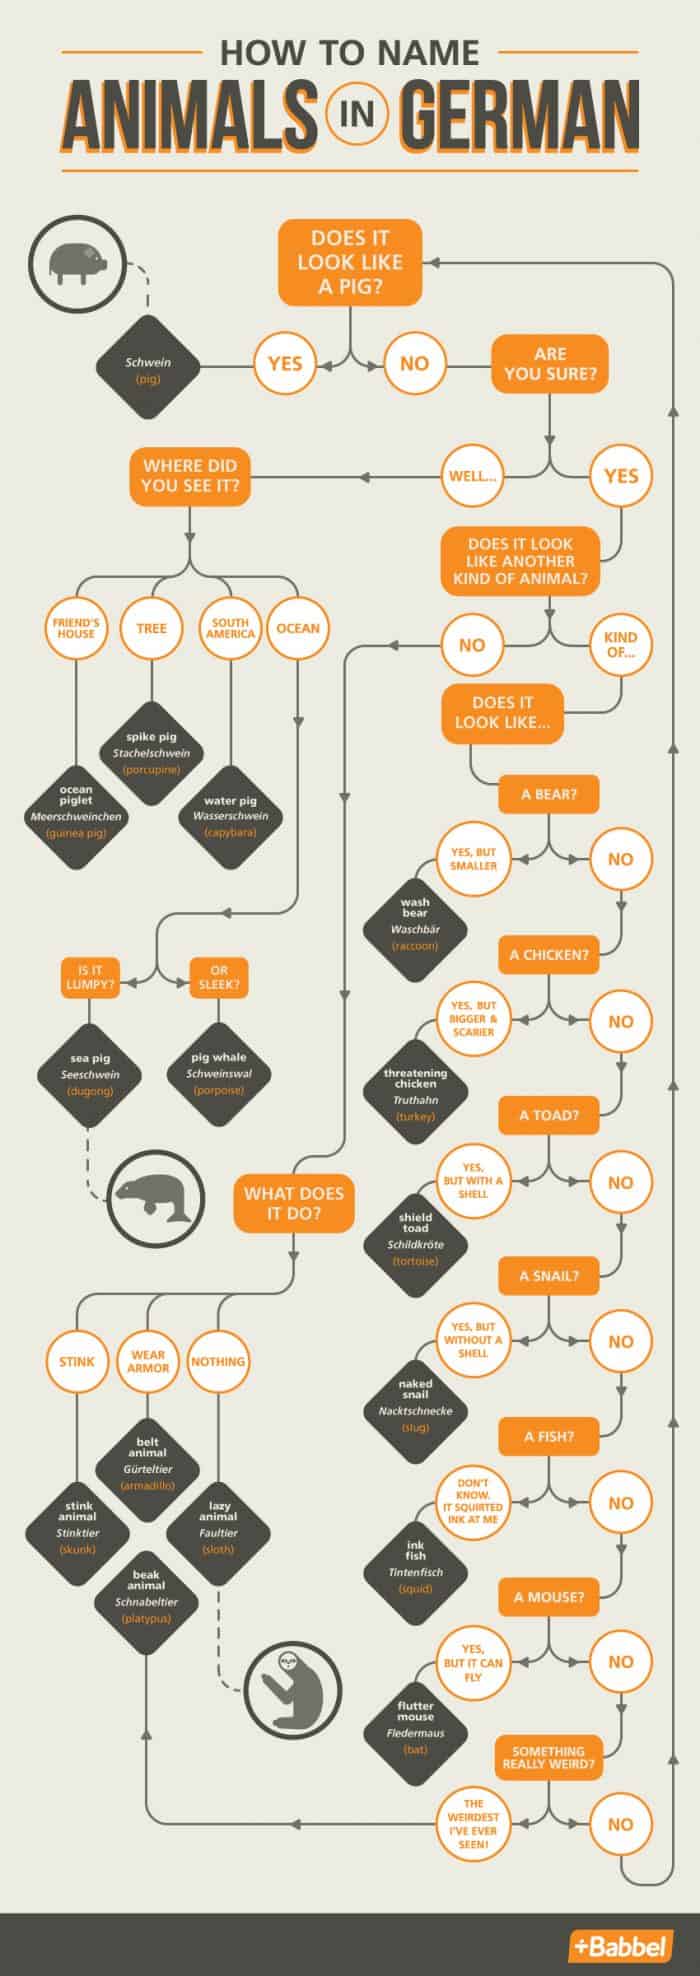 How To Name Animals In German Infographic